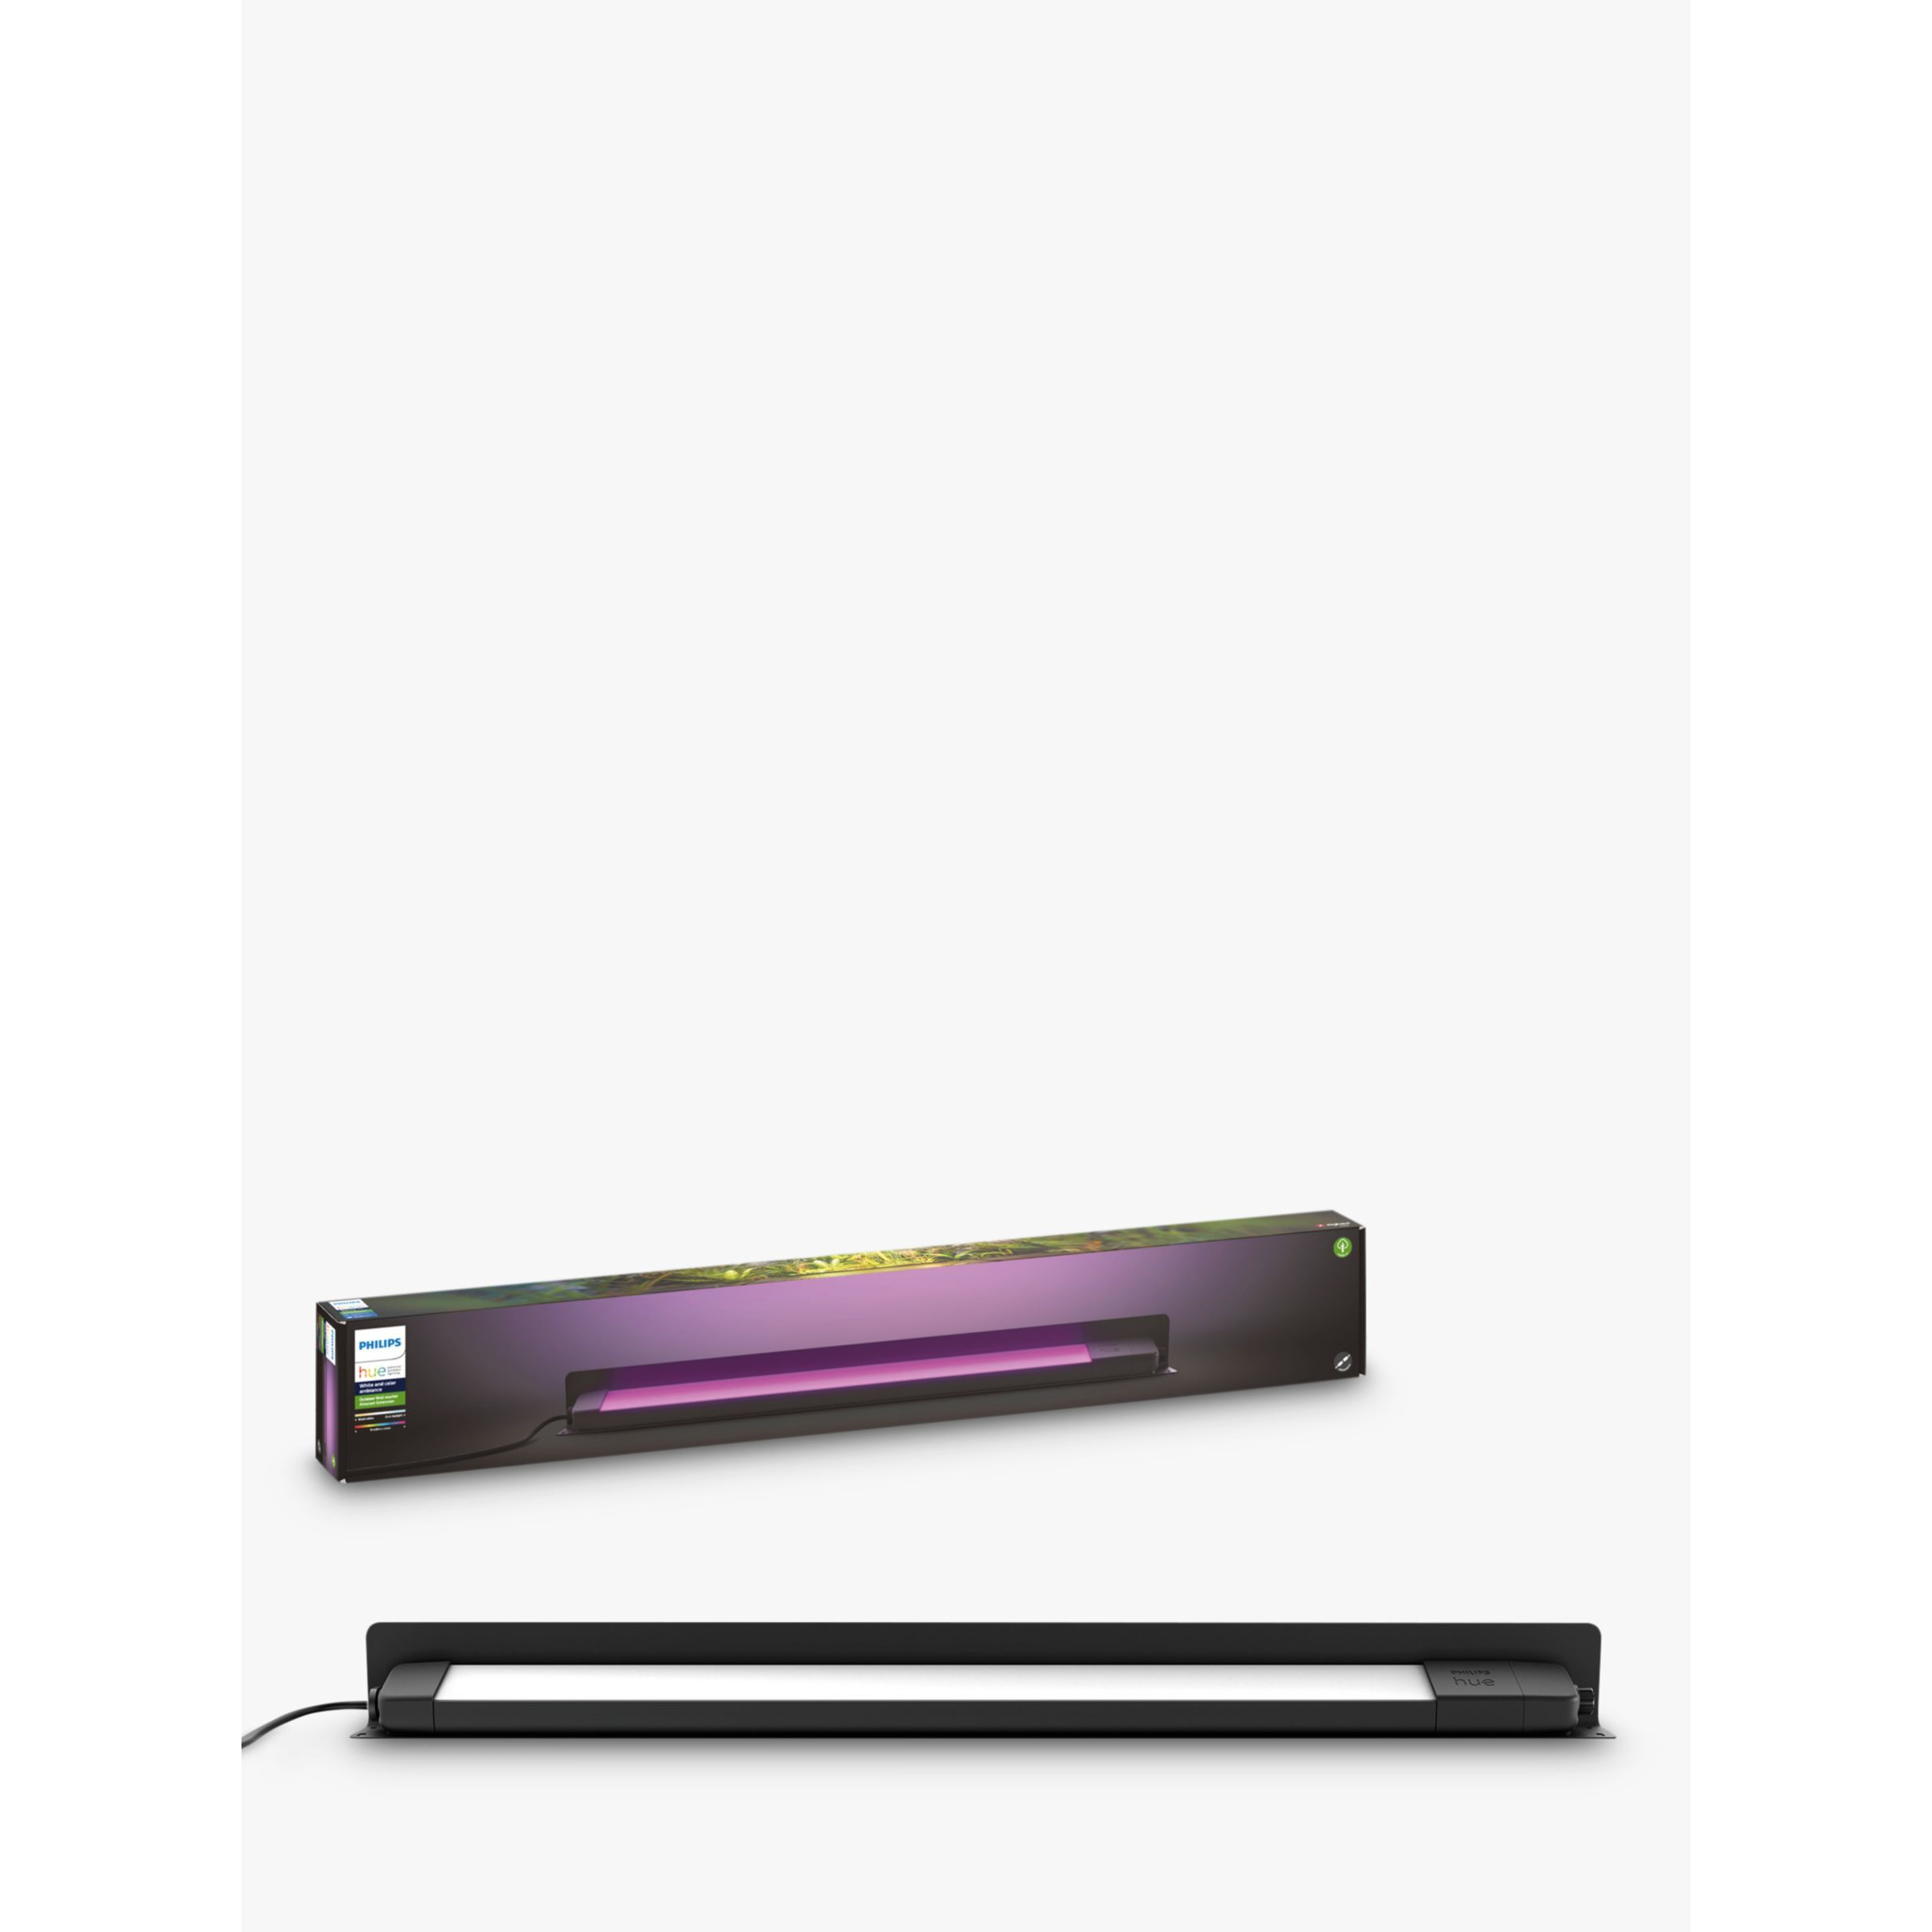 Philips Hue White and Colour Ambiance Amarant Linear LED Smart Outdoor Light - image 1